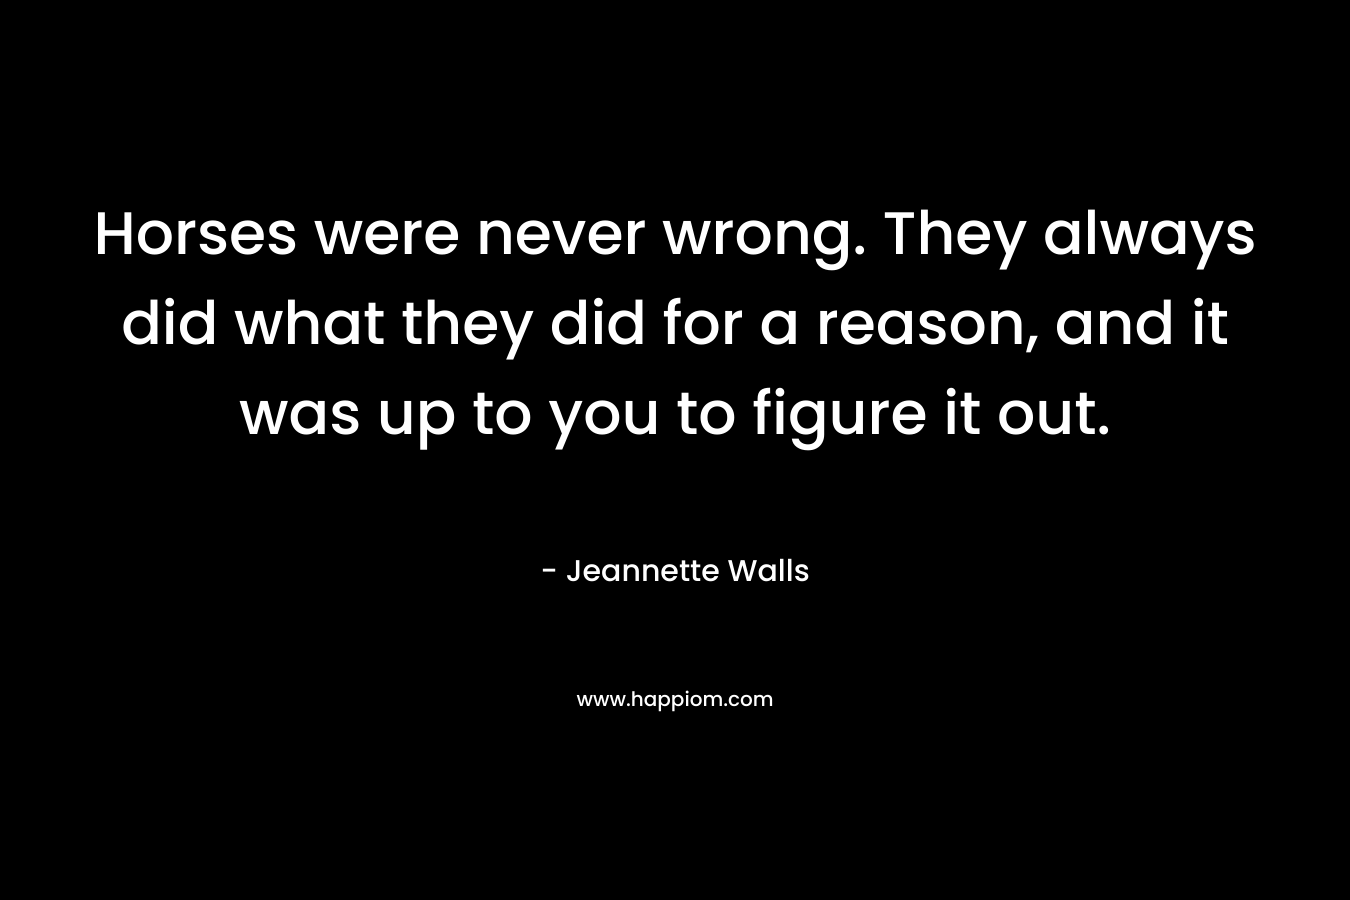 Horses were never wrong. They always did what they did for a reason, and it was up to you to figure it out. – Jeannette Walls